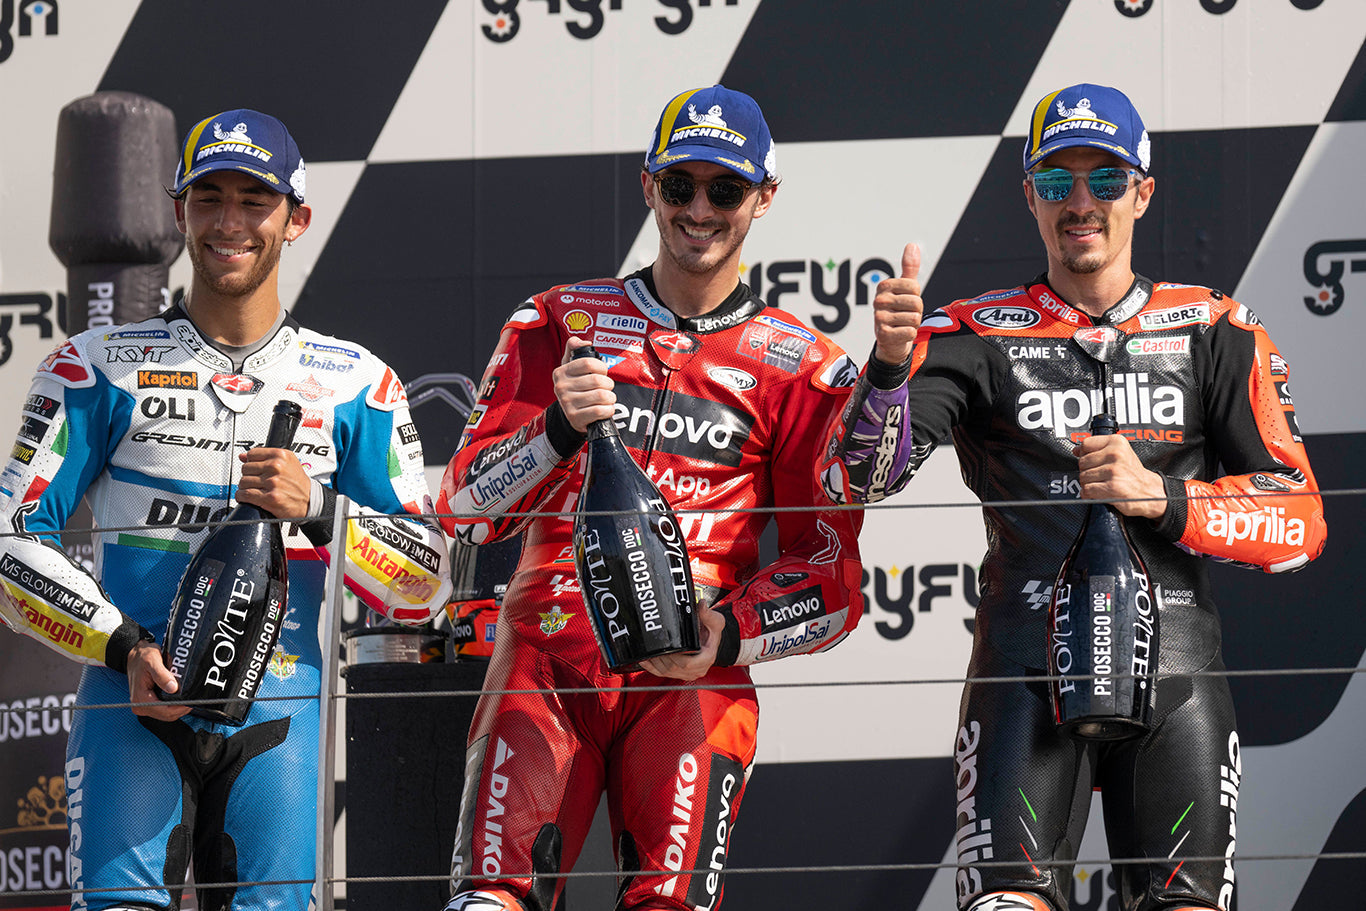 PECCO BAGNAIA WINNING STREAK CONTINUES AFTER TAKING HIS FOURTH WIN IN-A-ROW AS ALPINESTARS SWEEP PODIUM WITH ENEA BASTIANINI SECOND AND MAVERICK VINALES THIRD IN MISANO ADRIATICO, ITALY